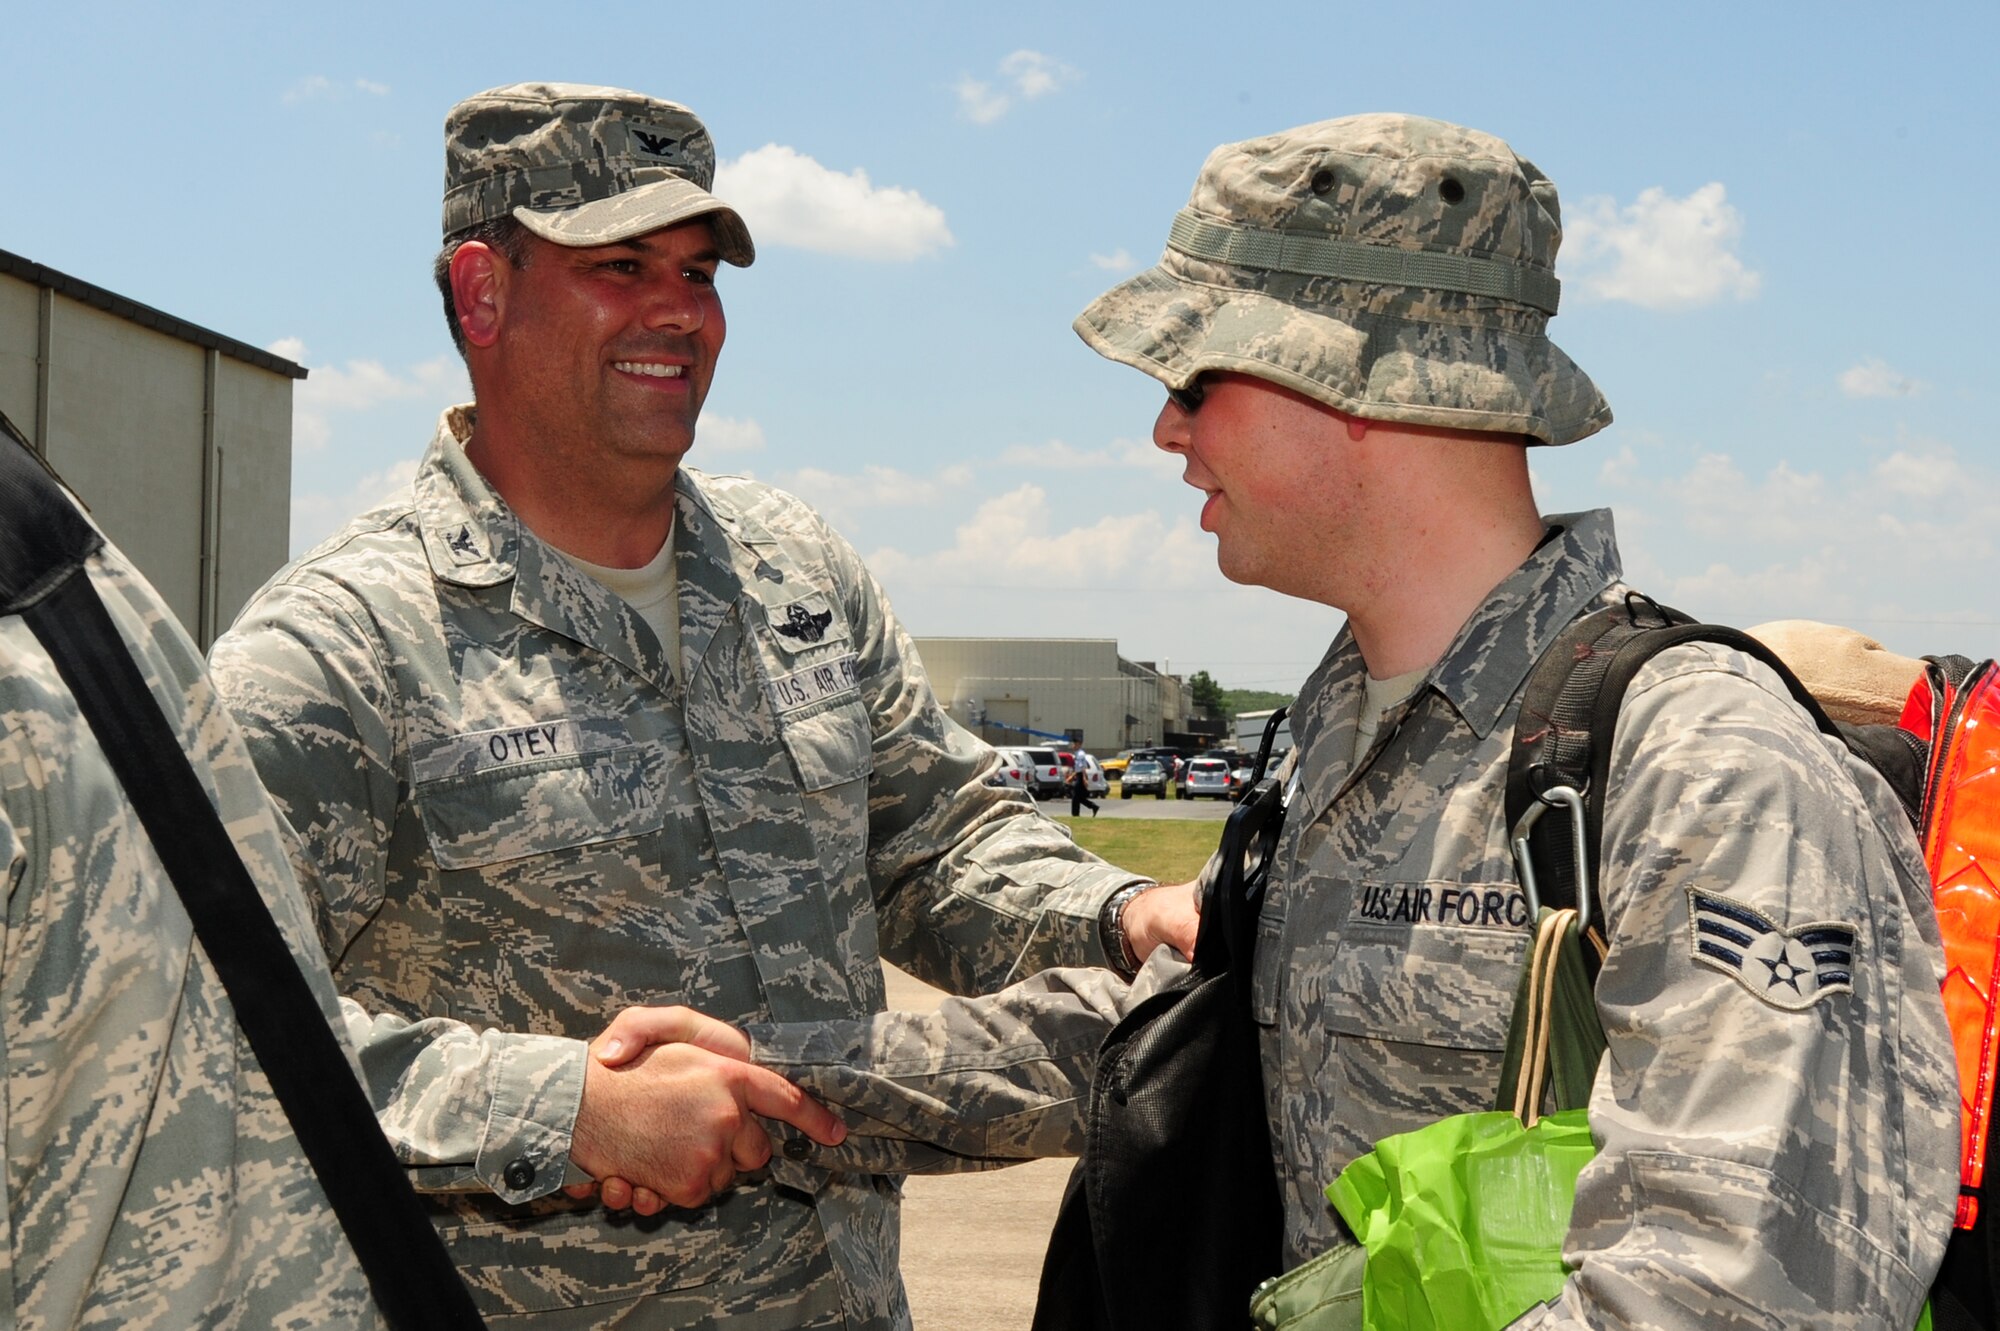 Col. Greg Otey, 19th Airlift Wing commander, greets a returning deployed Airman at bldg. 430 Monday. Little Rock Air Force Base Monday. Families and base leadership came together to greet returning Airmen and show appreciation for their sacrifice. (U.S. Air Force photo by Senior Airman Steele Britton)